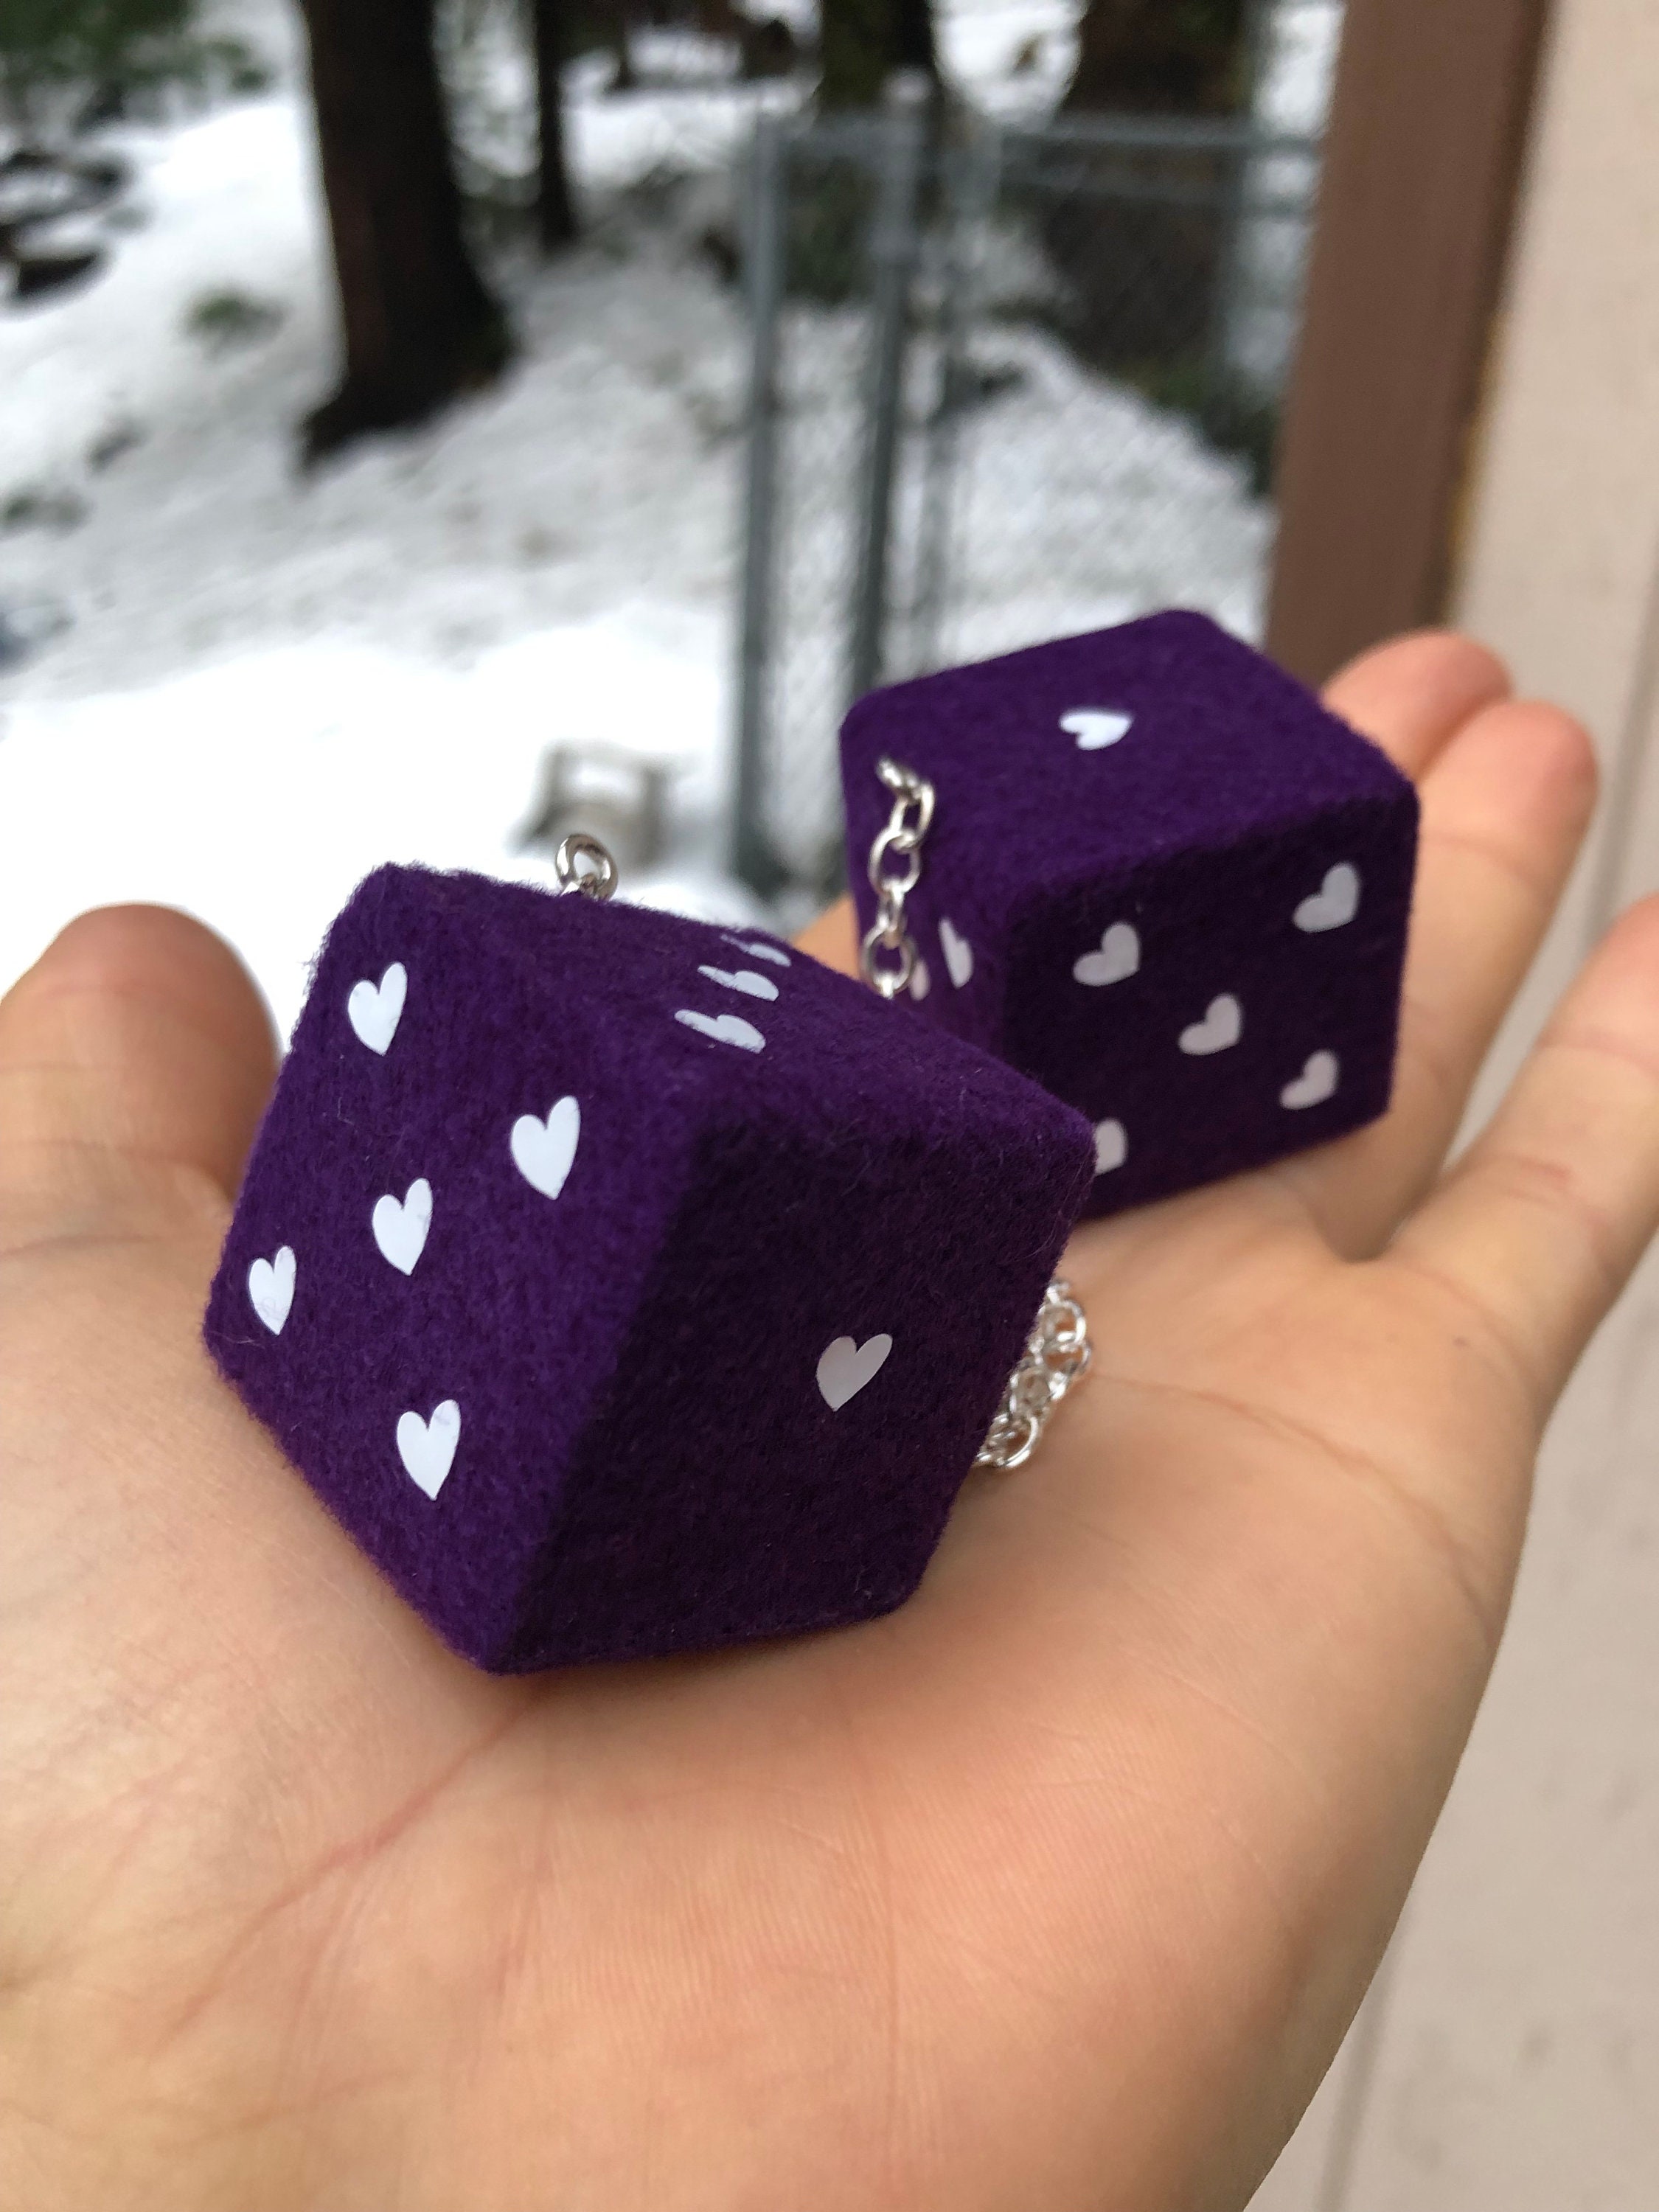 Dark Purple Fuzzy Dice With White Hearts and Chain or Cord / Car  Accessories, Charms, Gift, Novelty, Mirror Danglers, Car Dice, Car Charm 